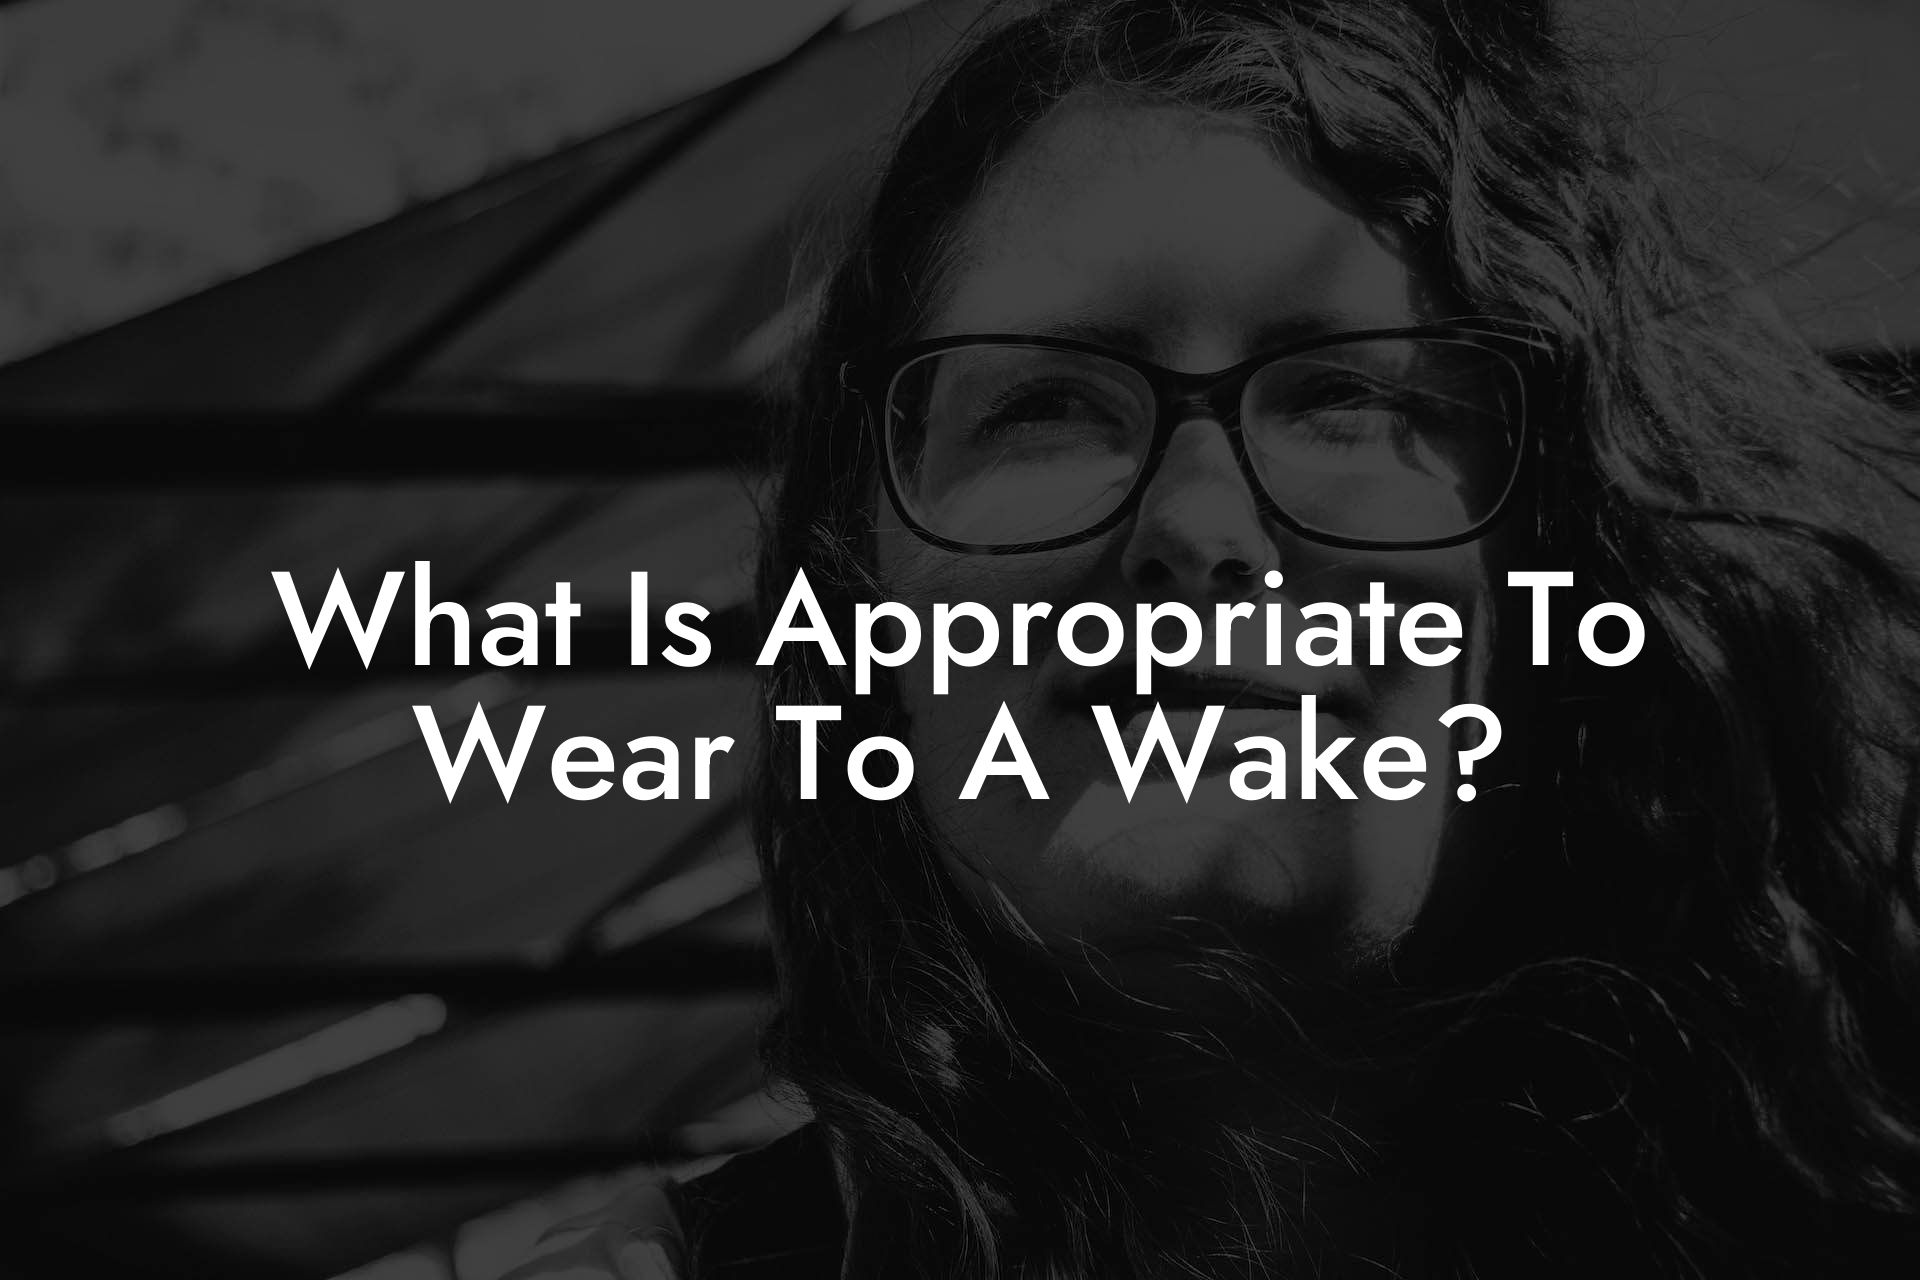 What Is Appropriate To Wear To A Wake?